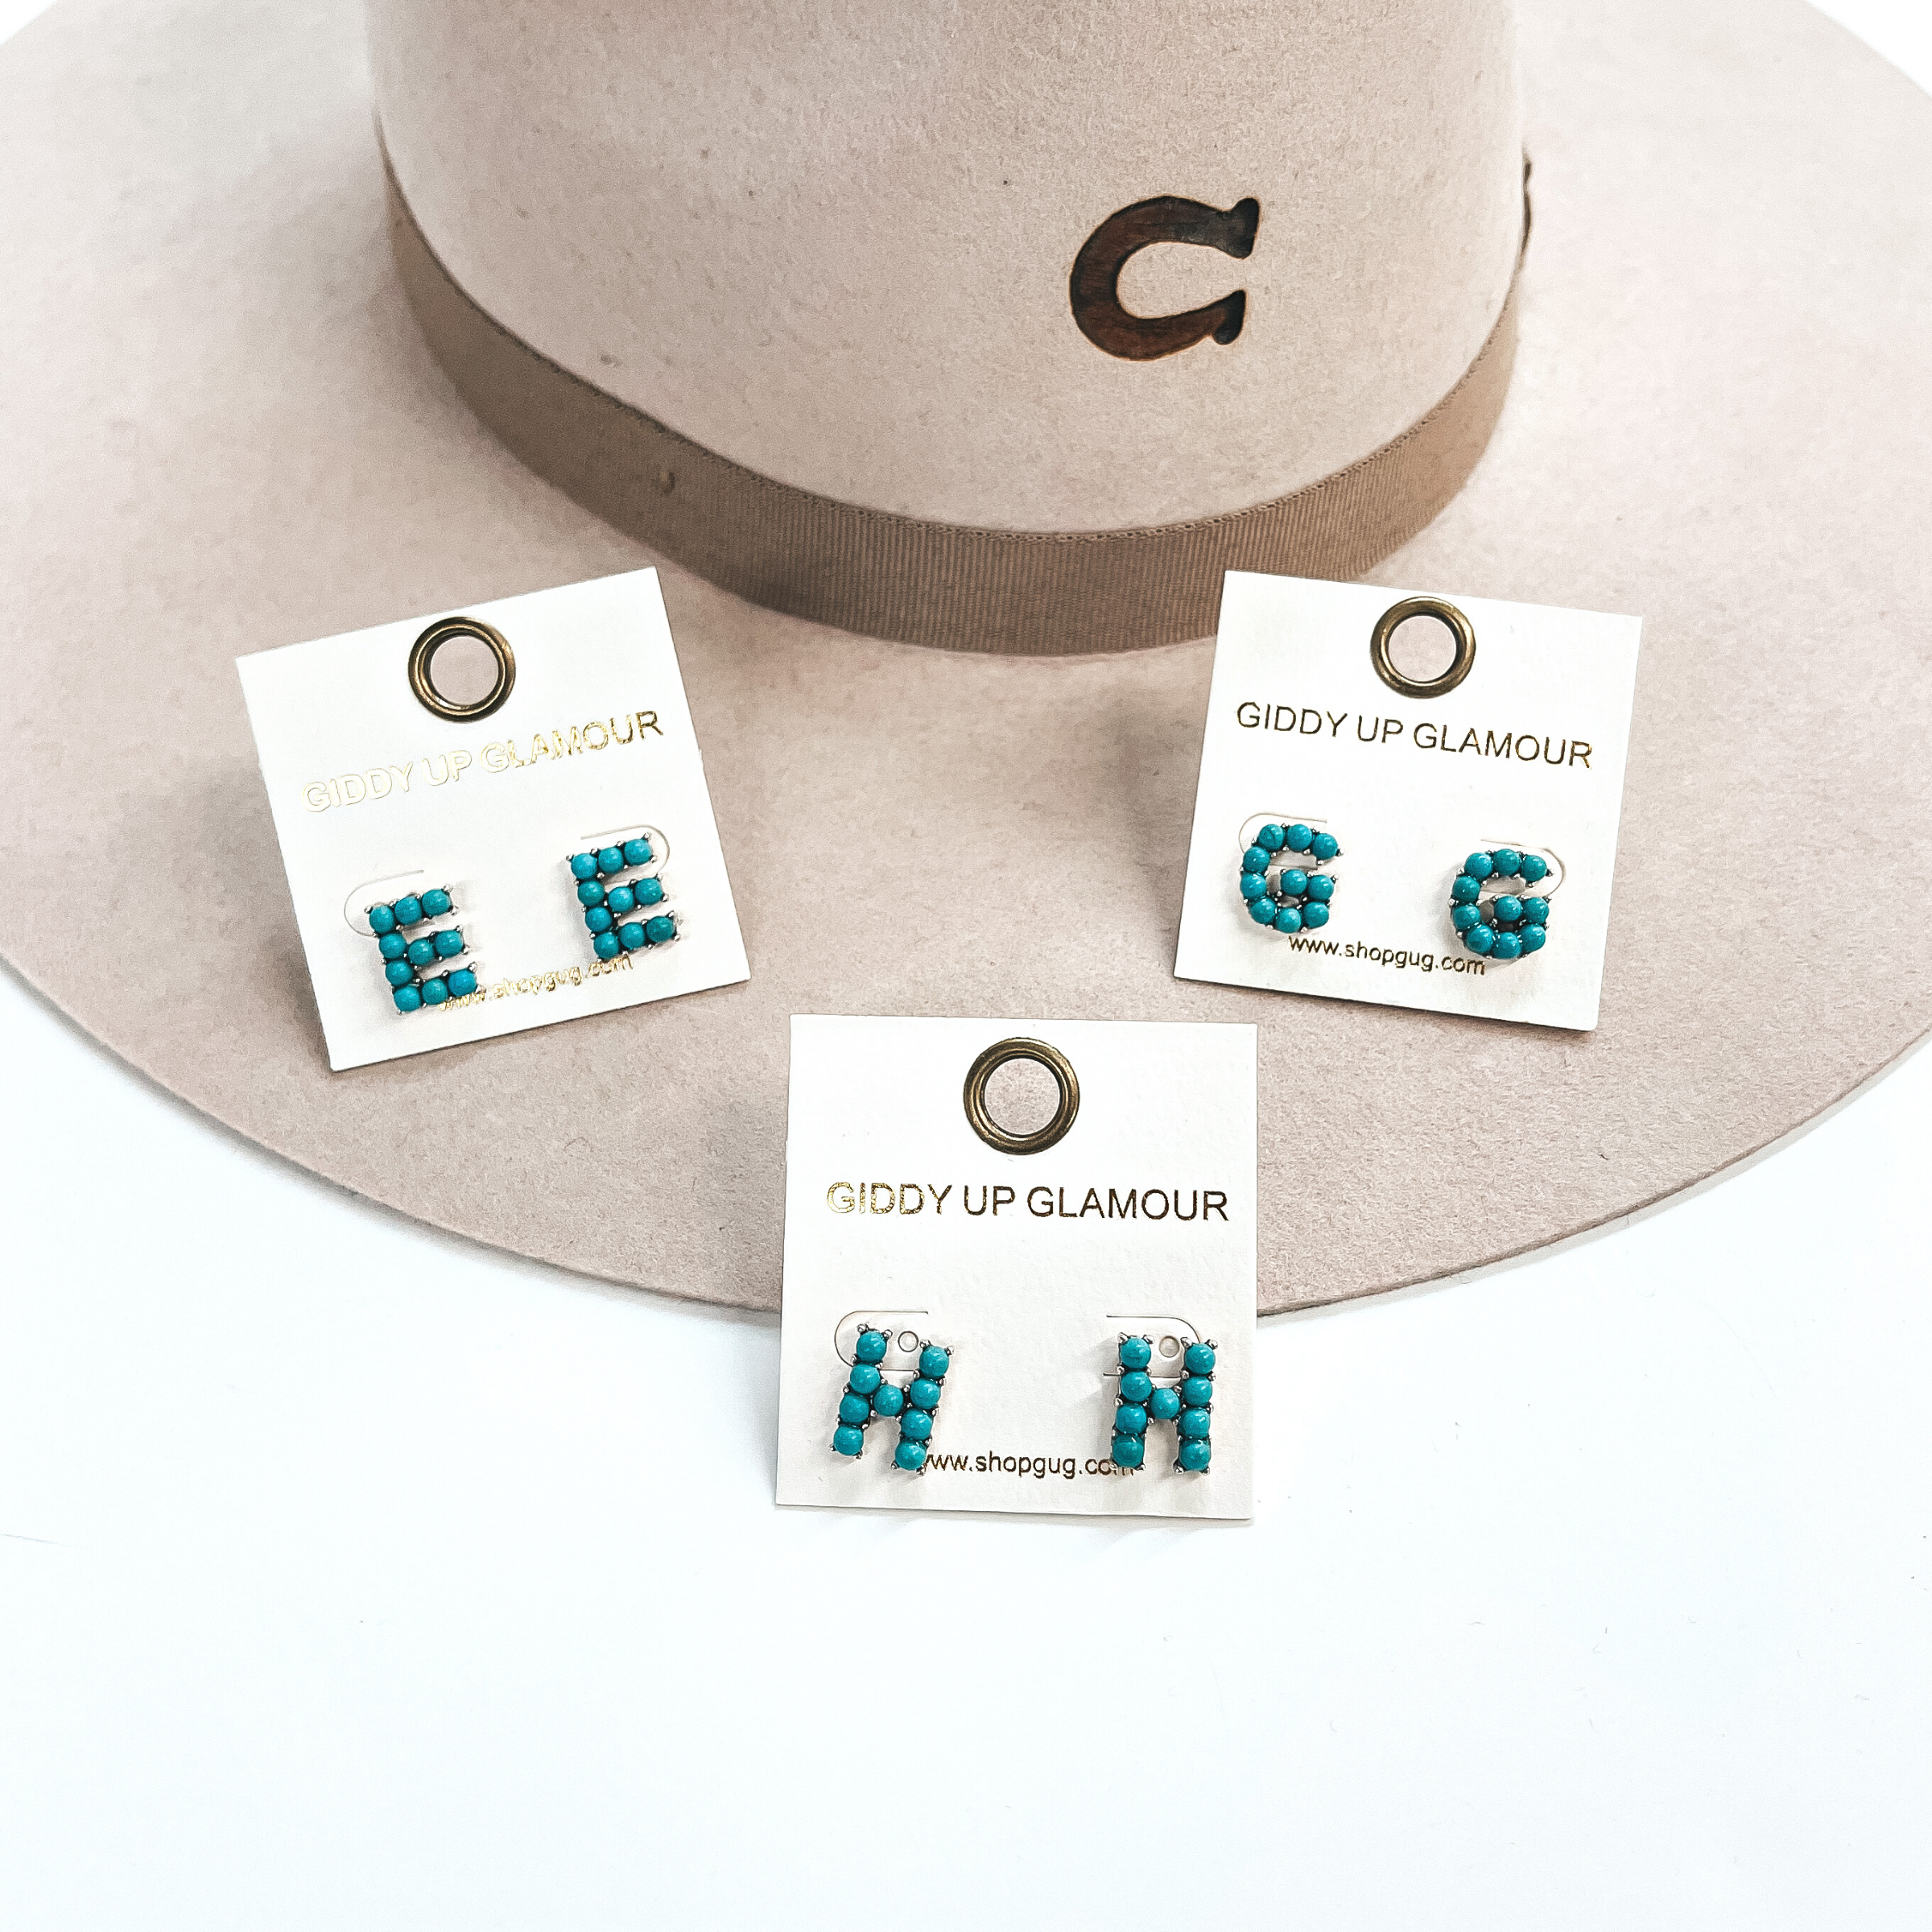 These are three pair of initial earrings with small turquoise stones in  a silver setting. From left to right; E,H,G. These earrings are placed  on a white Giddy Up Glamour card, they are laying on a beige, felt,  Charlie 1 Horse hat and on a white background.